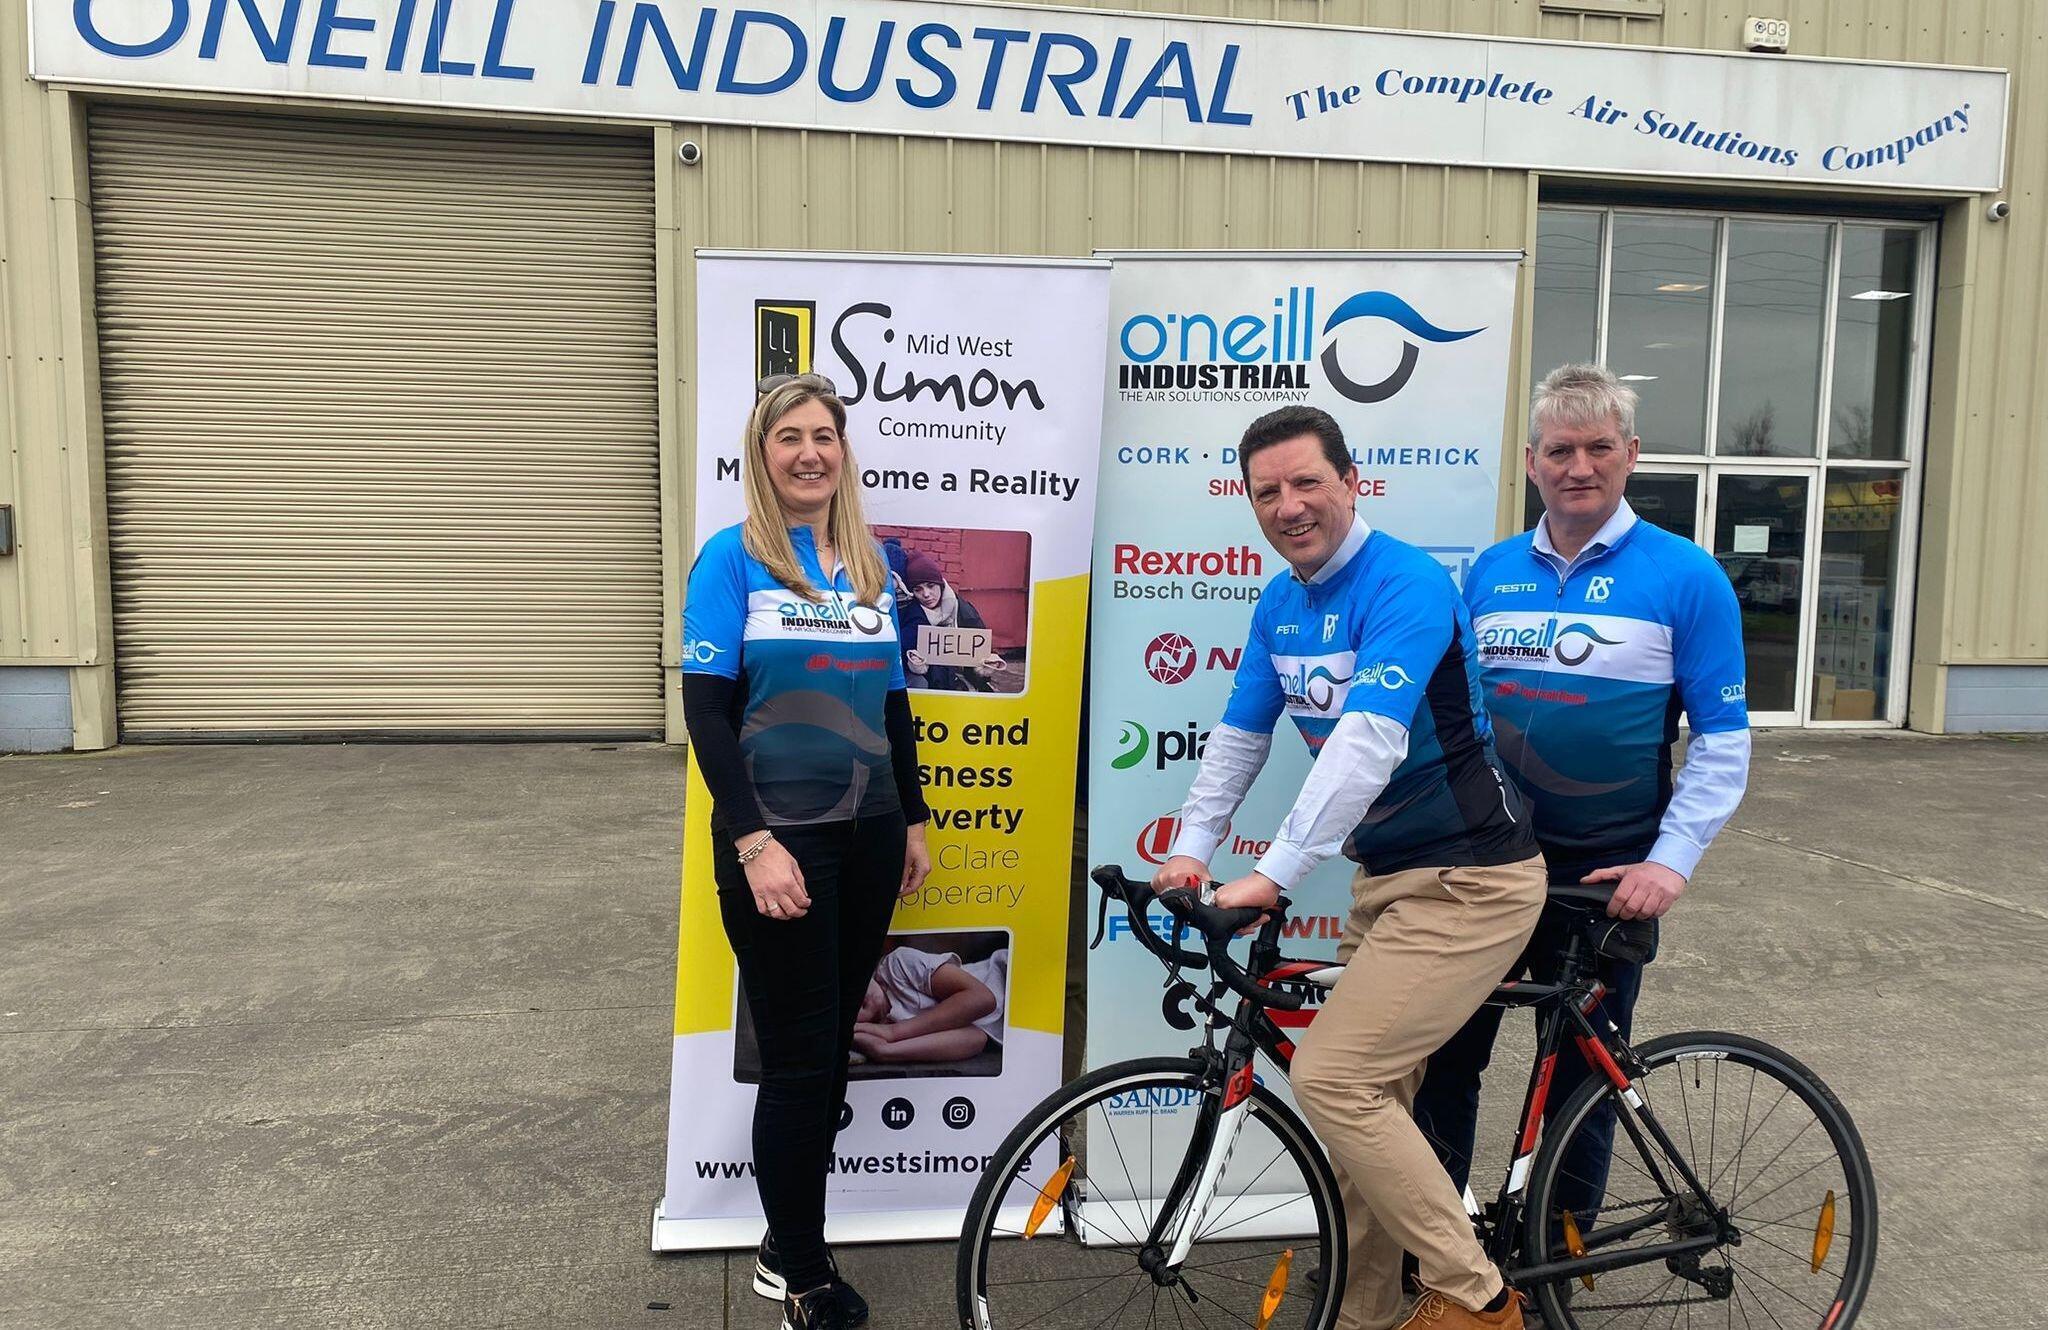 O Neill Industrial Charity O Neill Industrial Charity Cycle - Pictured are Maura McMahon, Events & Donor Relationship Manager, Mid West Simon Community, Michael O’Neill, Director, O’Neill Industrial and Austin O’Neill O’Neill Industrial.